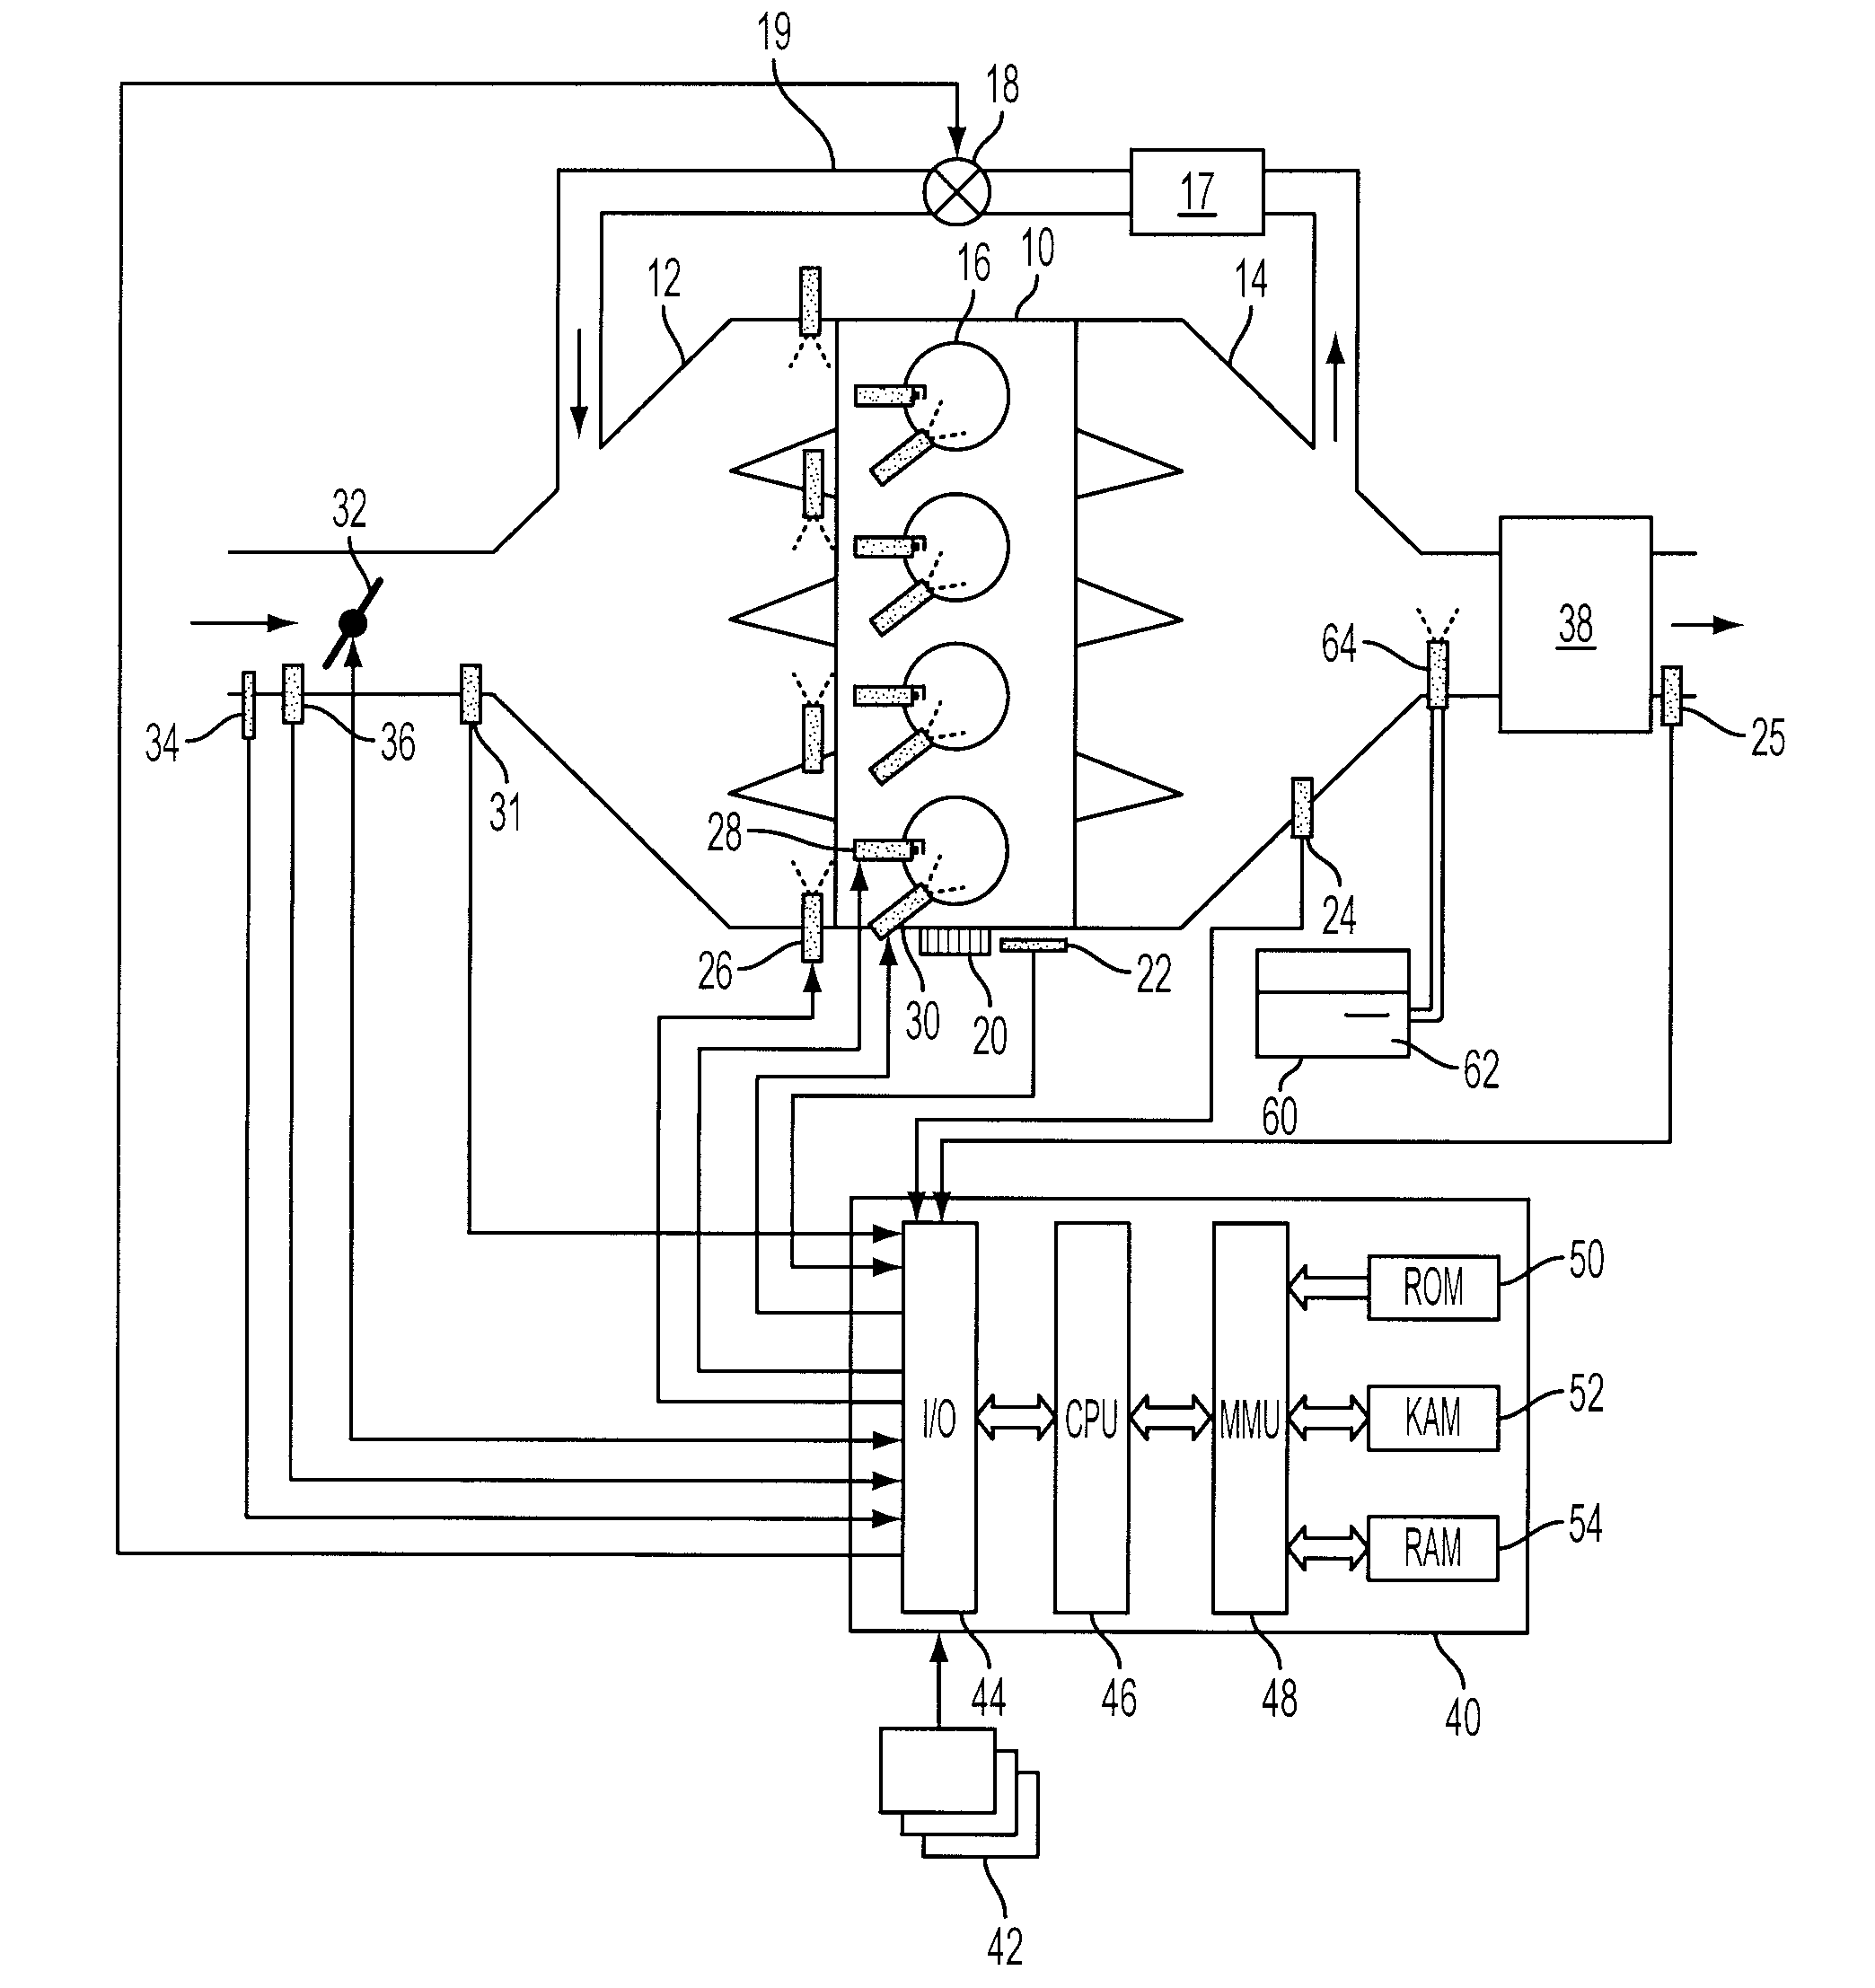 Exhaust Treatment device Facilitating Through-Wall Flow